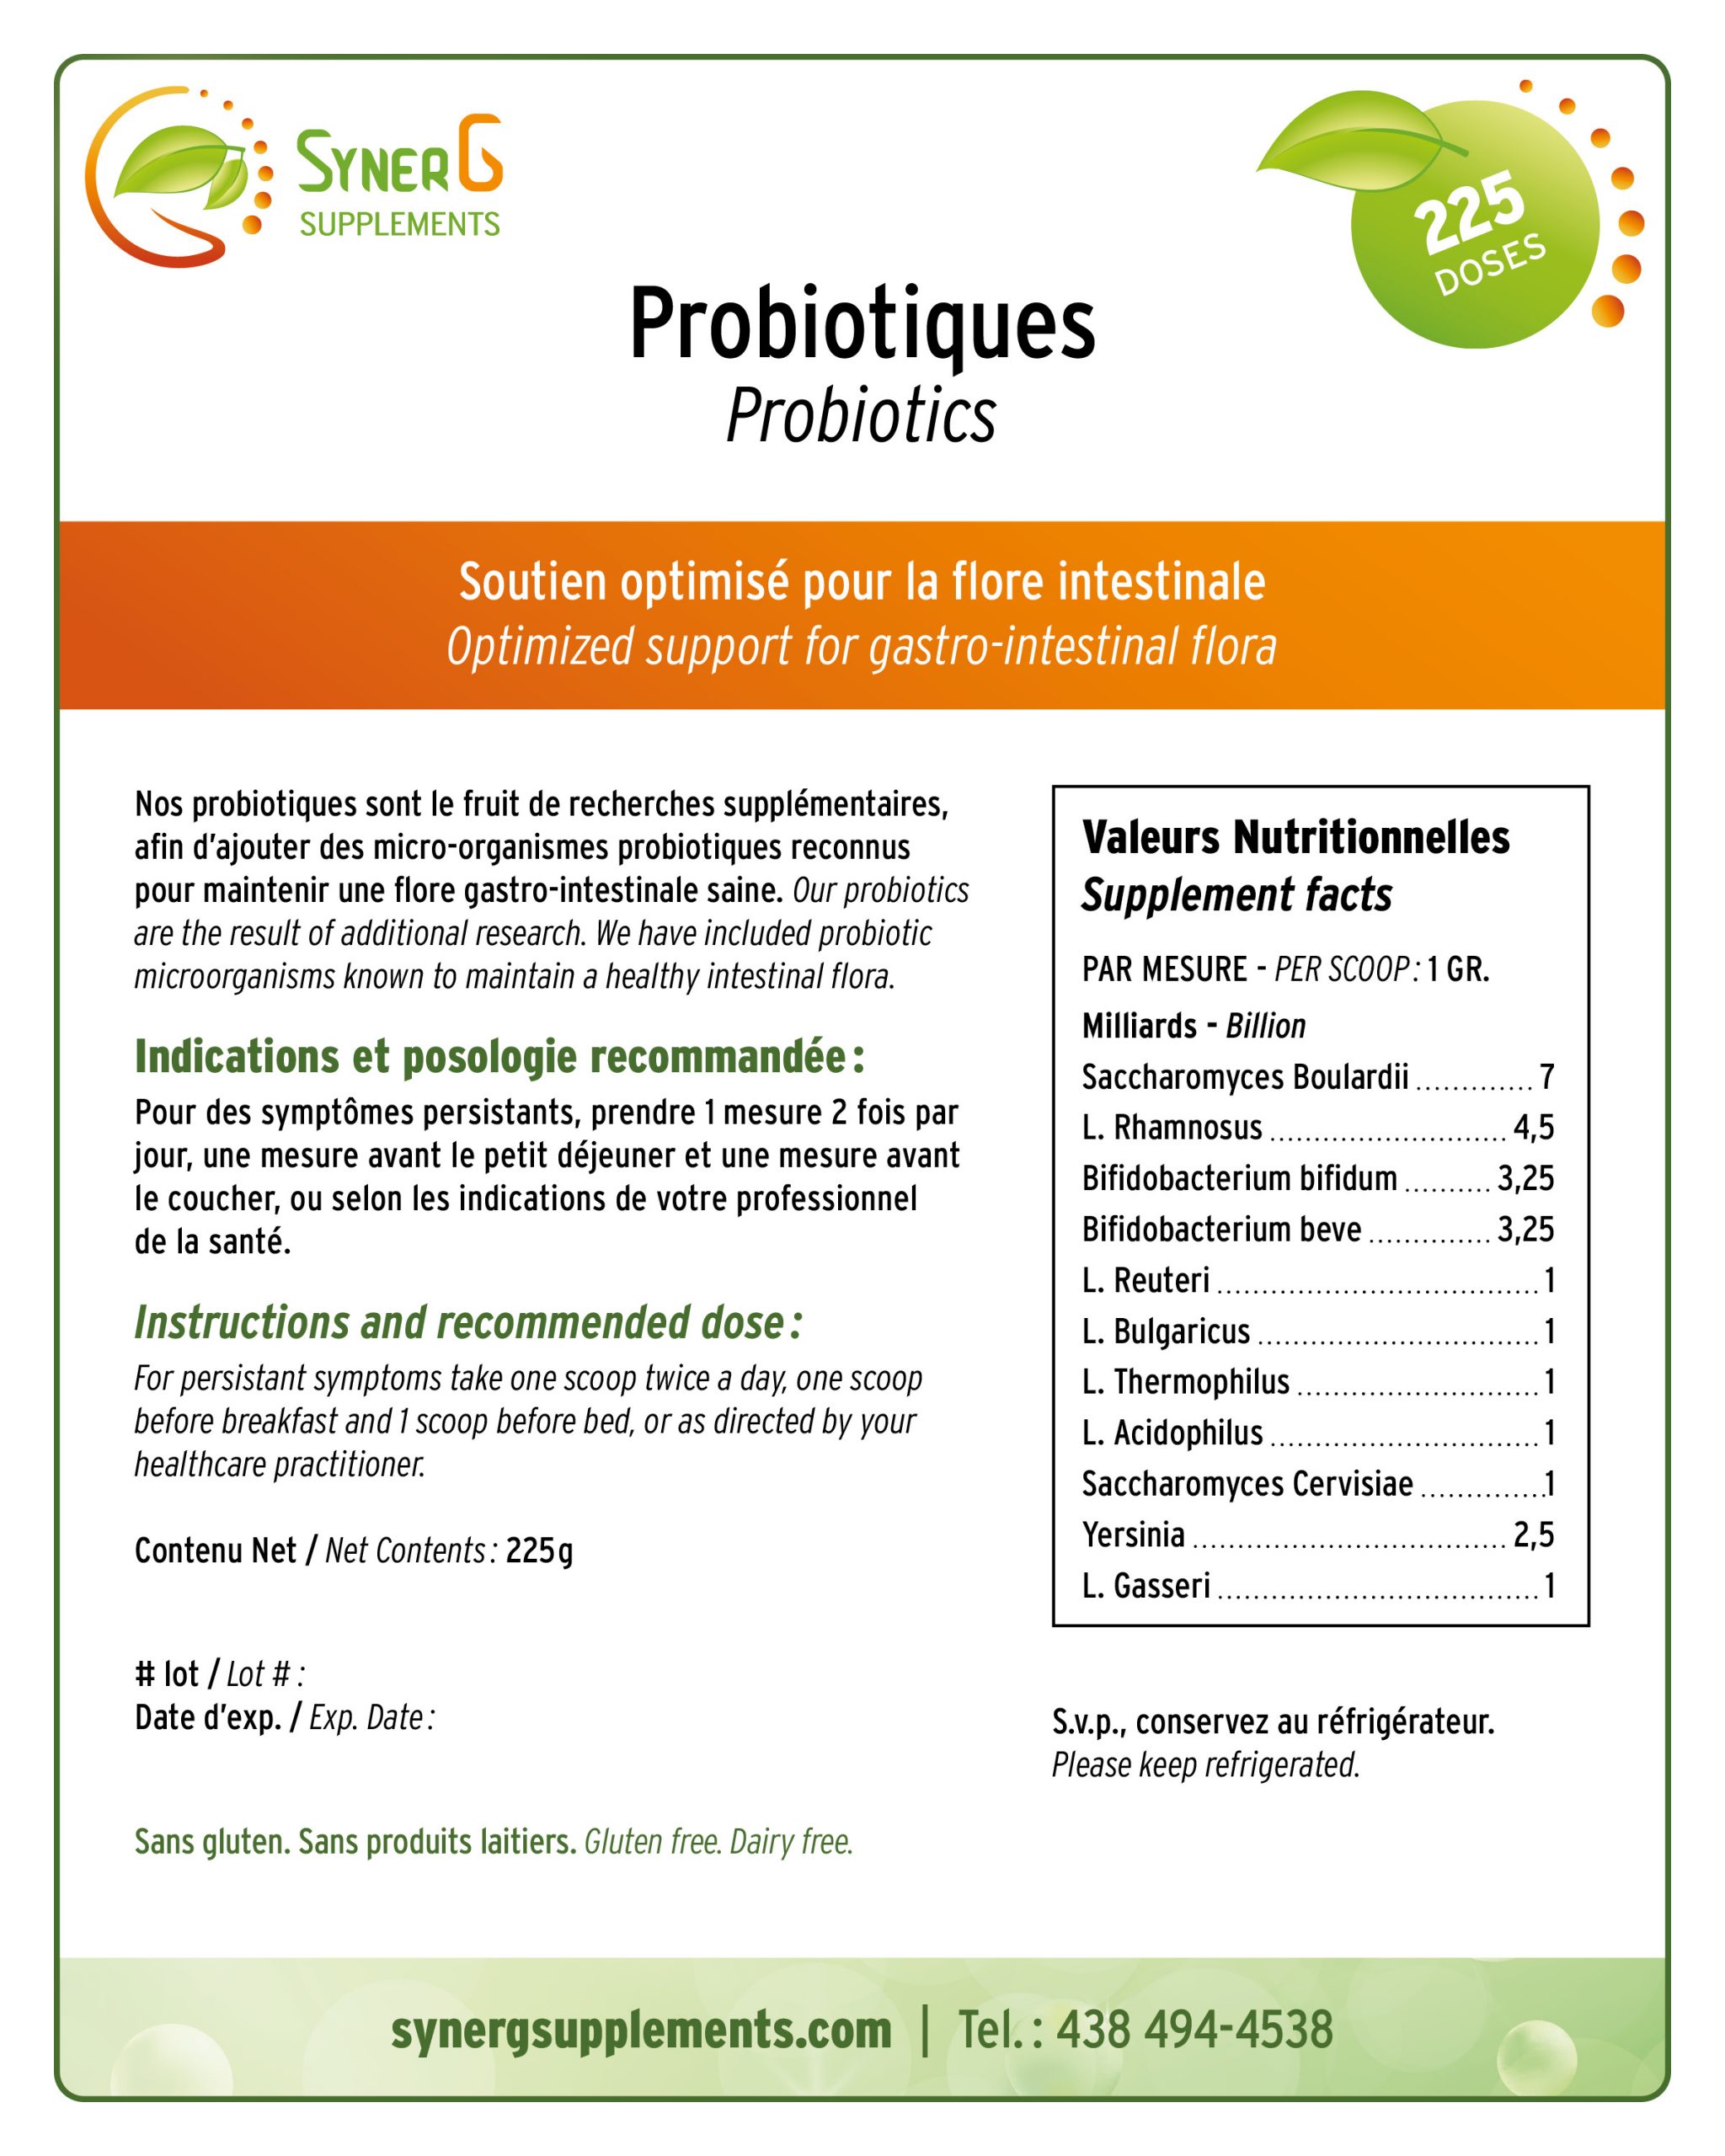 SynerG_Probiotiques225g